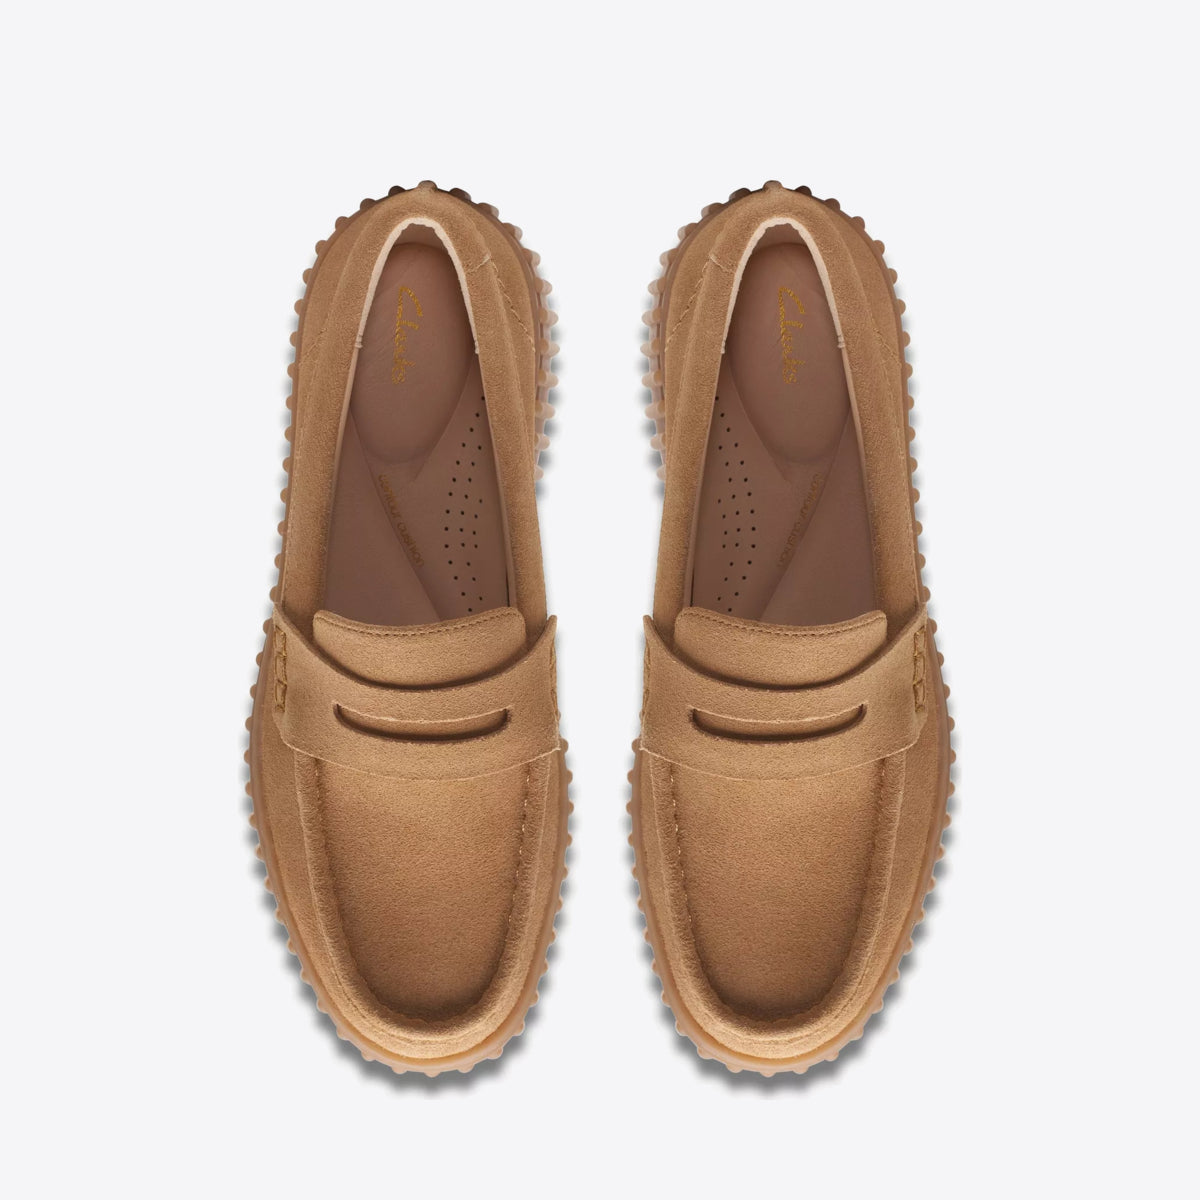 CLARKS Womens Torhill Penny Light Tan Suede - Image 6